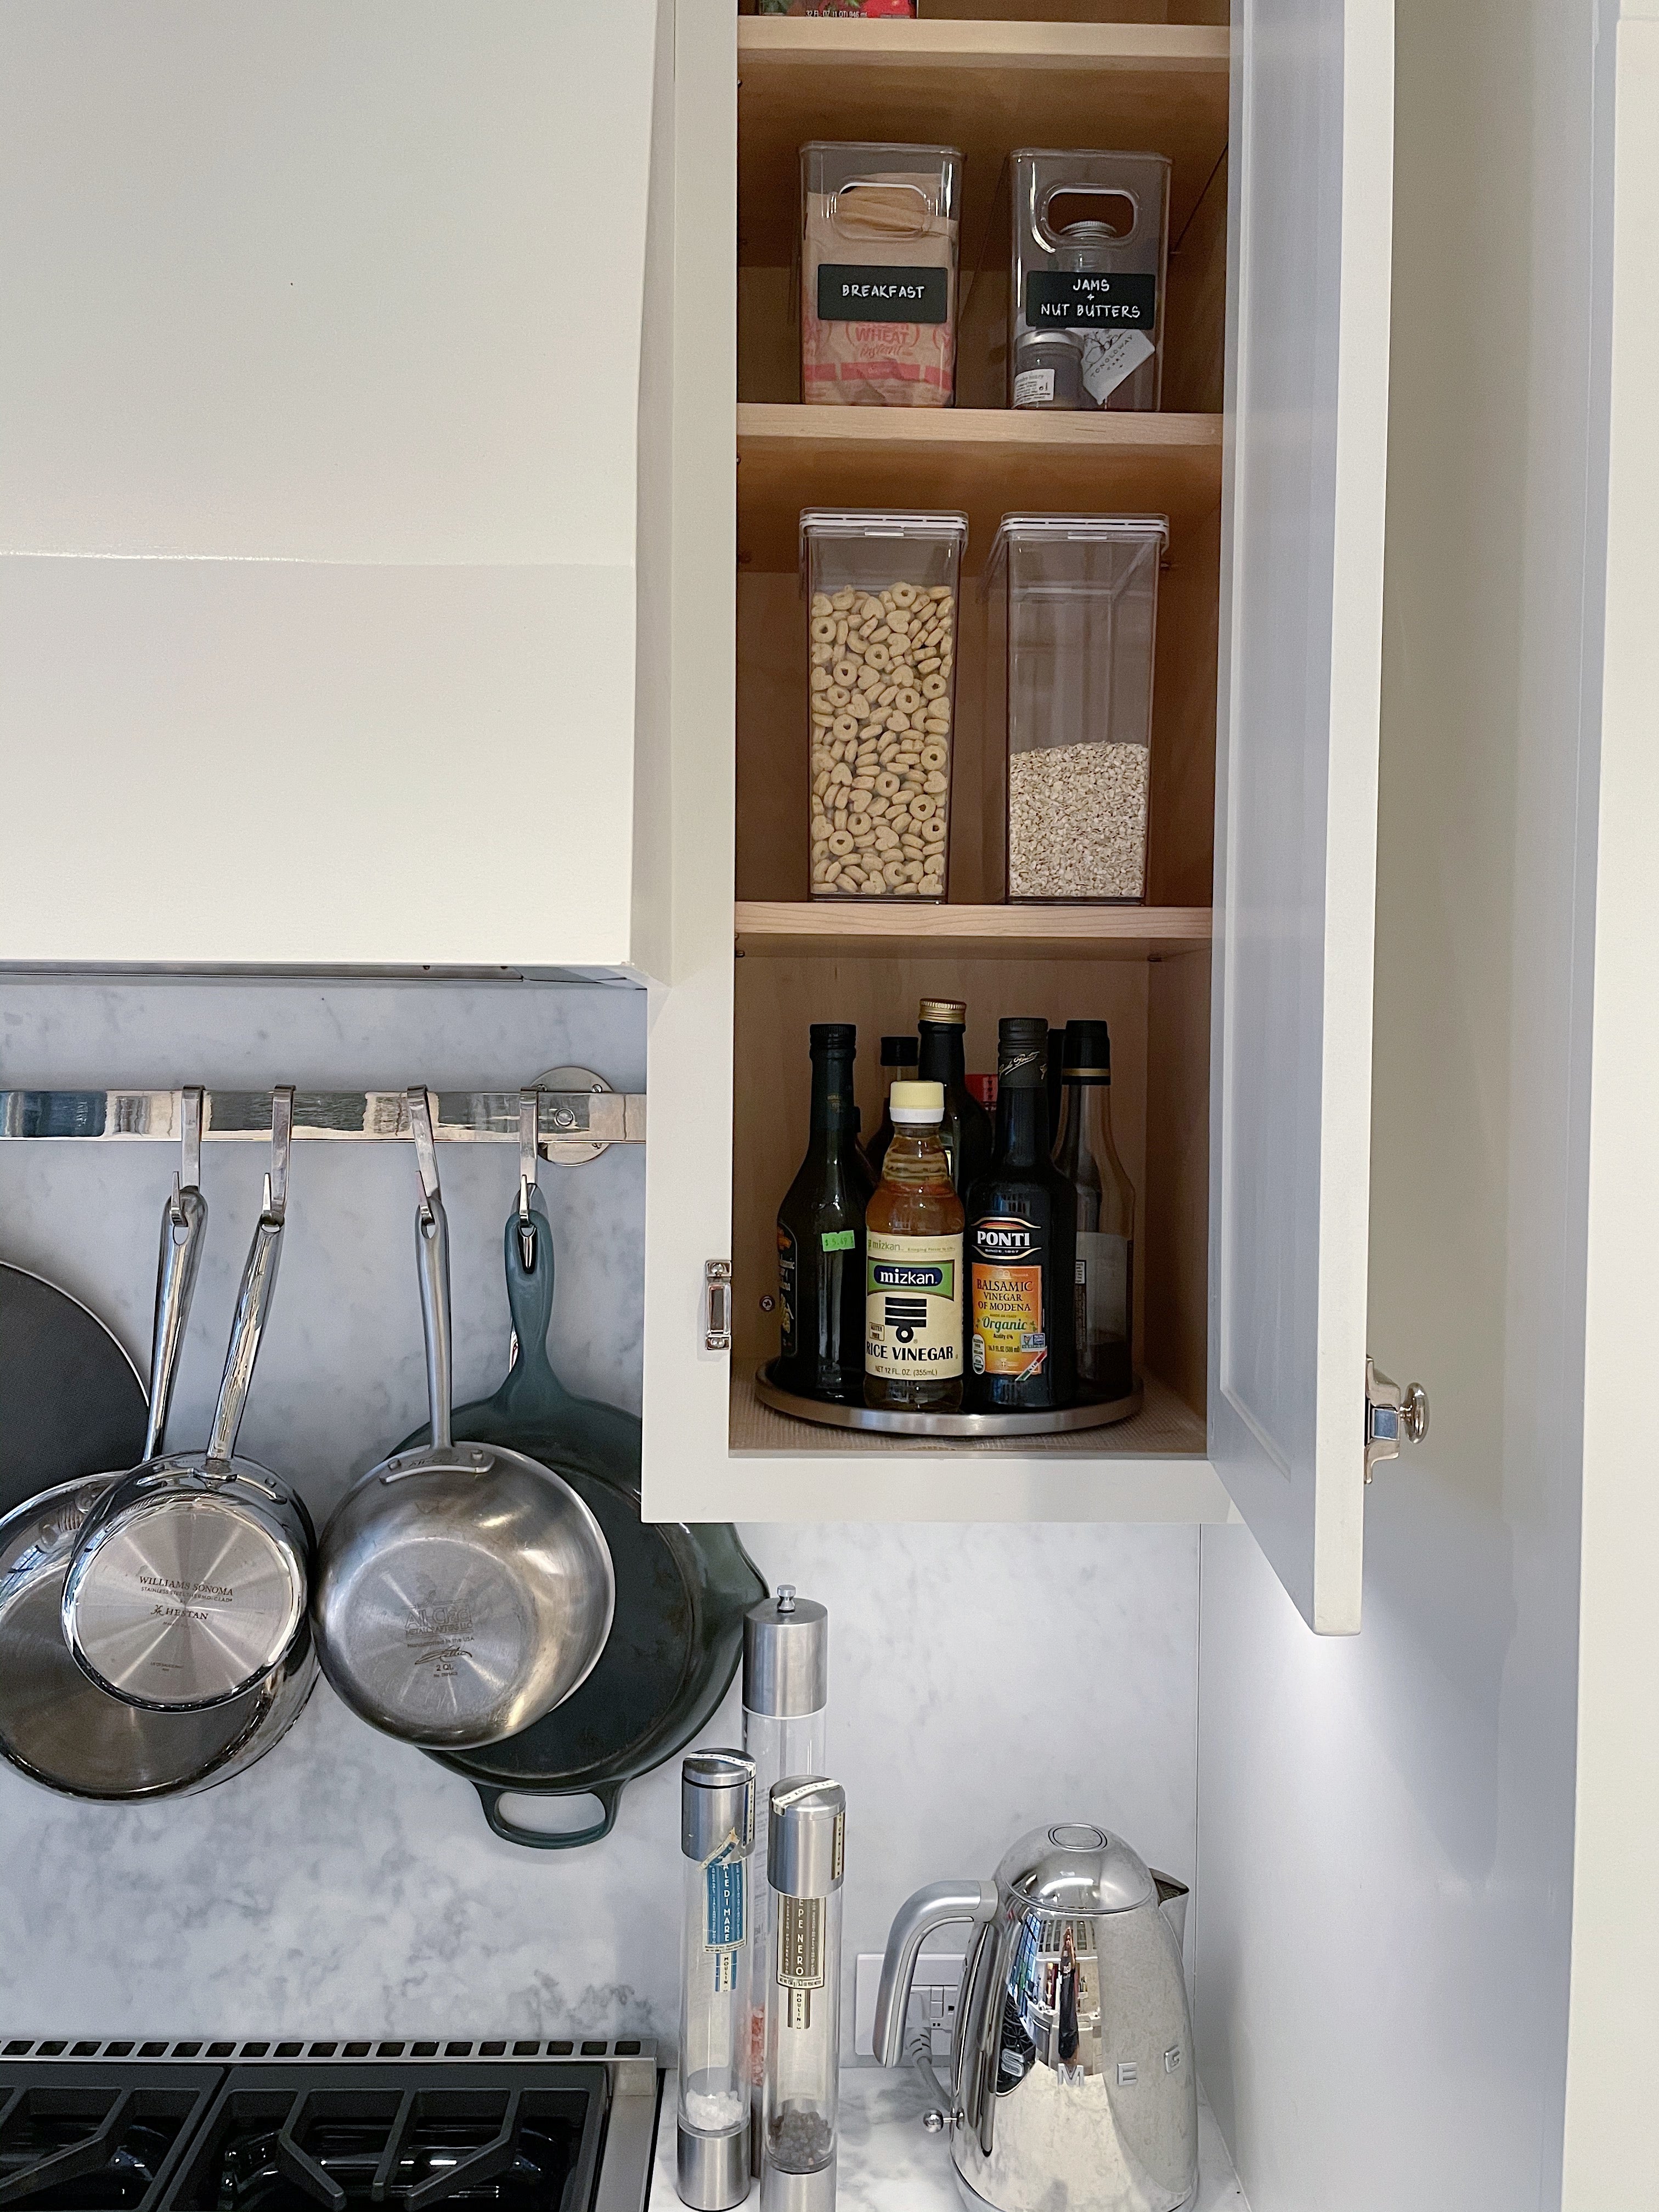 How We Organized Our Small Kitchen